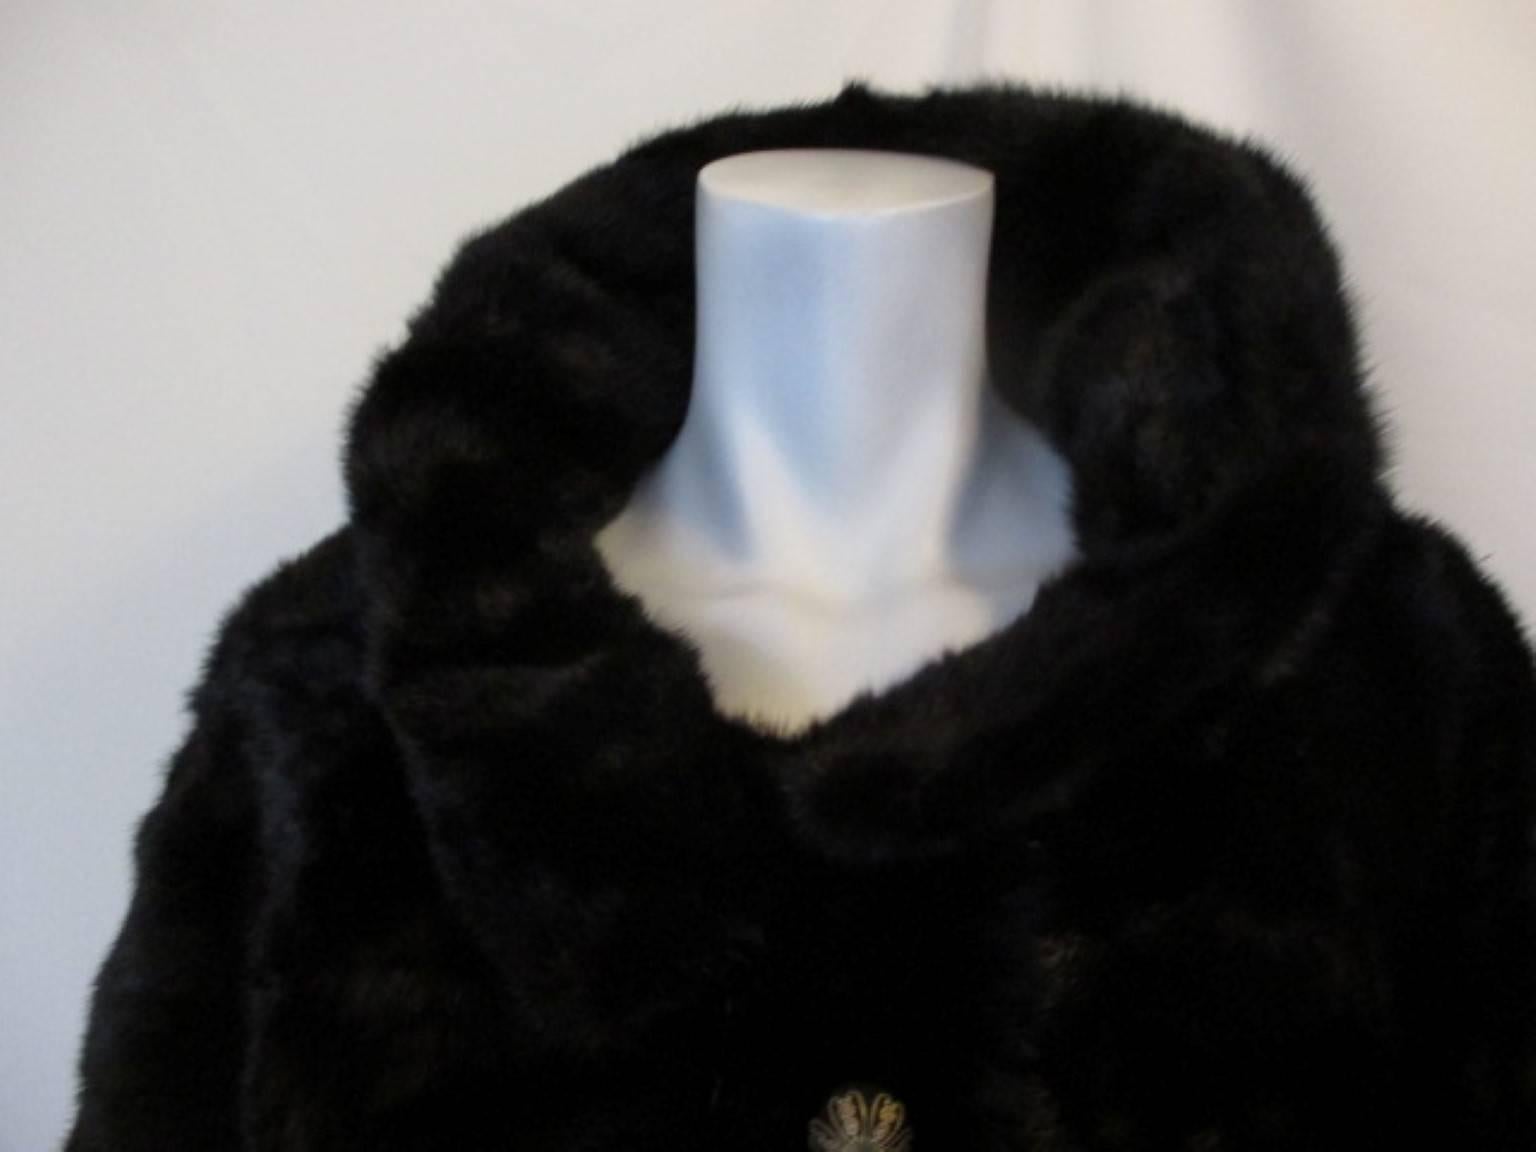 This Neiman- Marcus black mink has 2 pockets, 1 closing hook at the collar and 4 decorative buttons.

We offer more exclusive fur items, view our frontstore

It has a number issued by the fur label authorithy, Y460607 and it is monogrammed, see